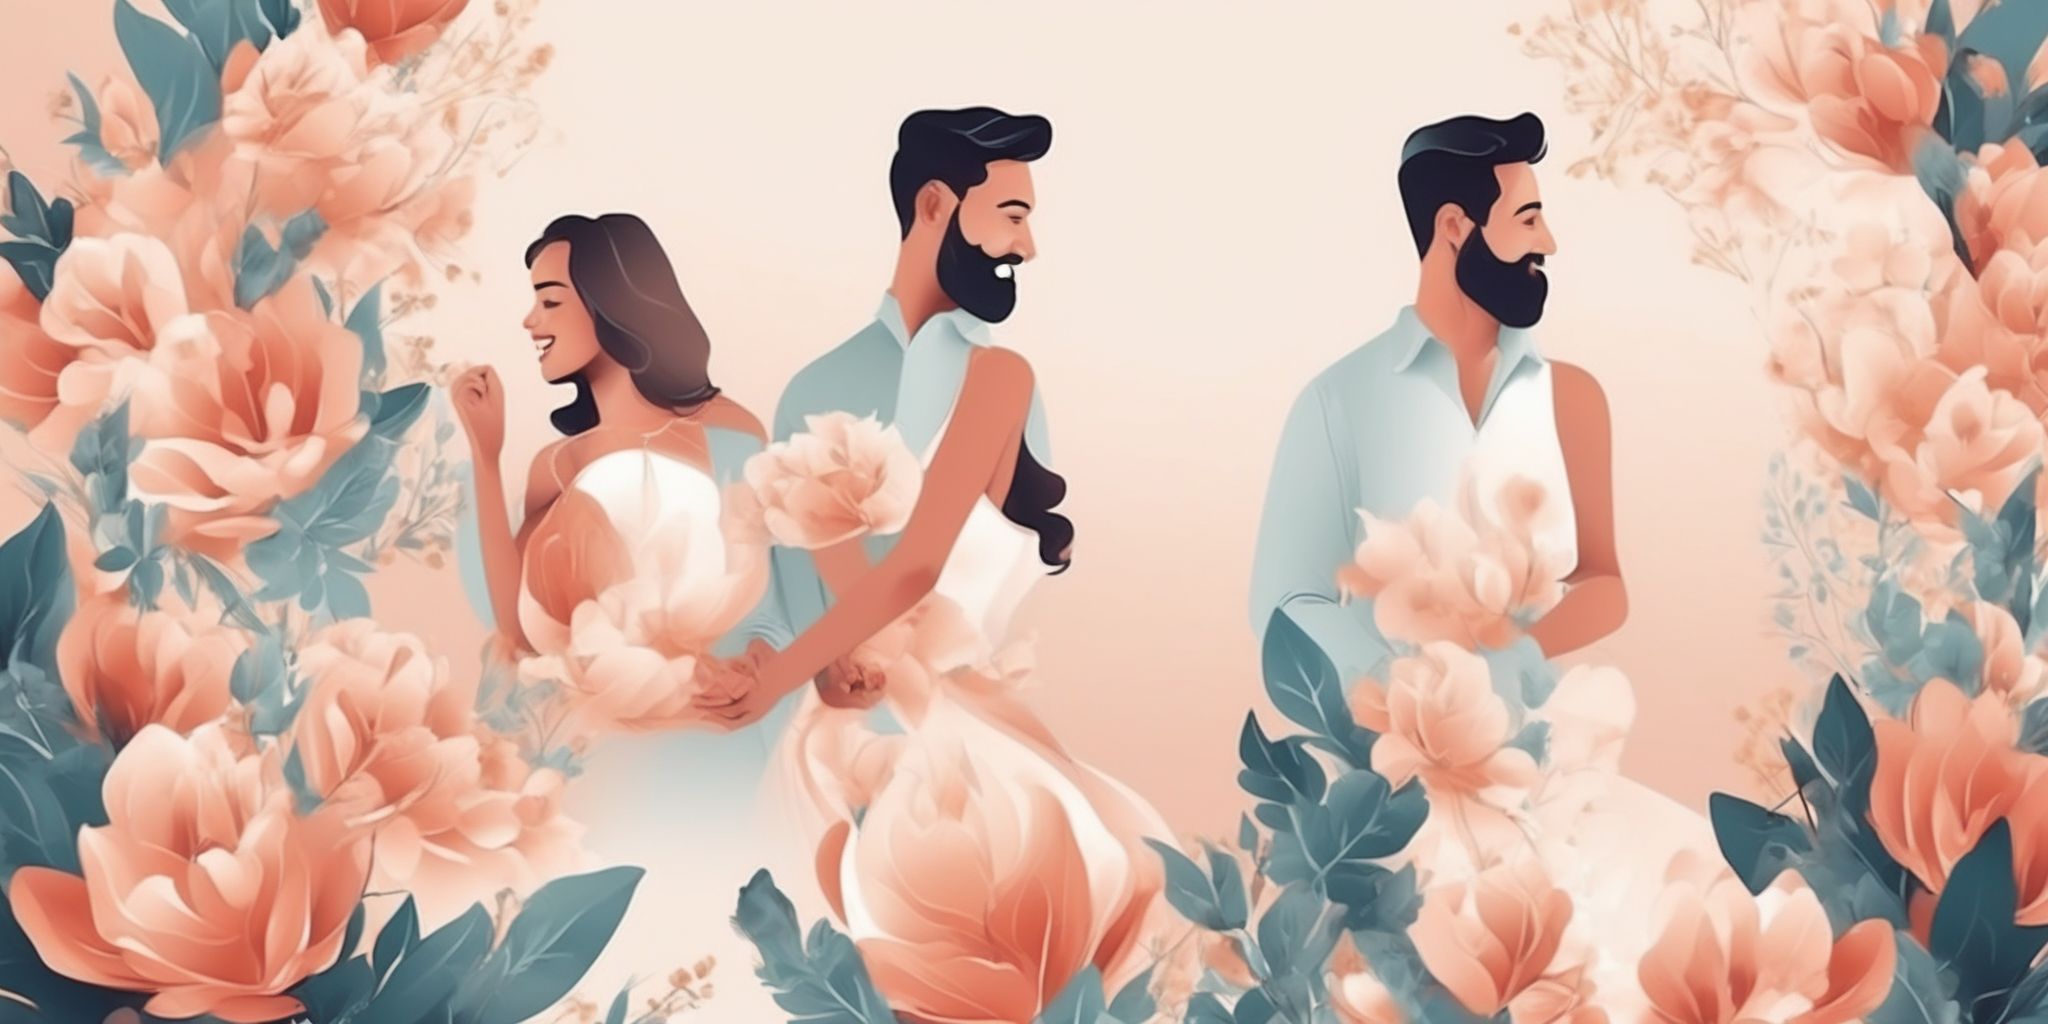 engagement in illustration style with gradients and white background